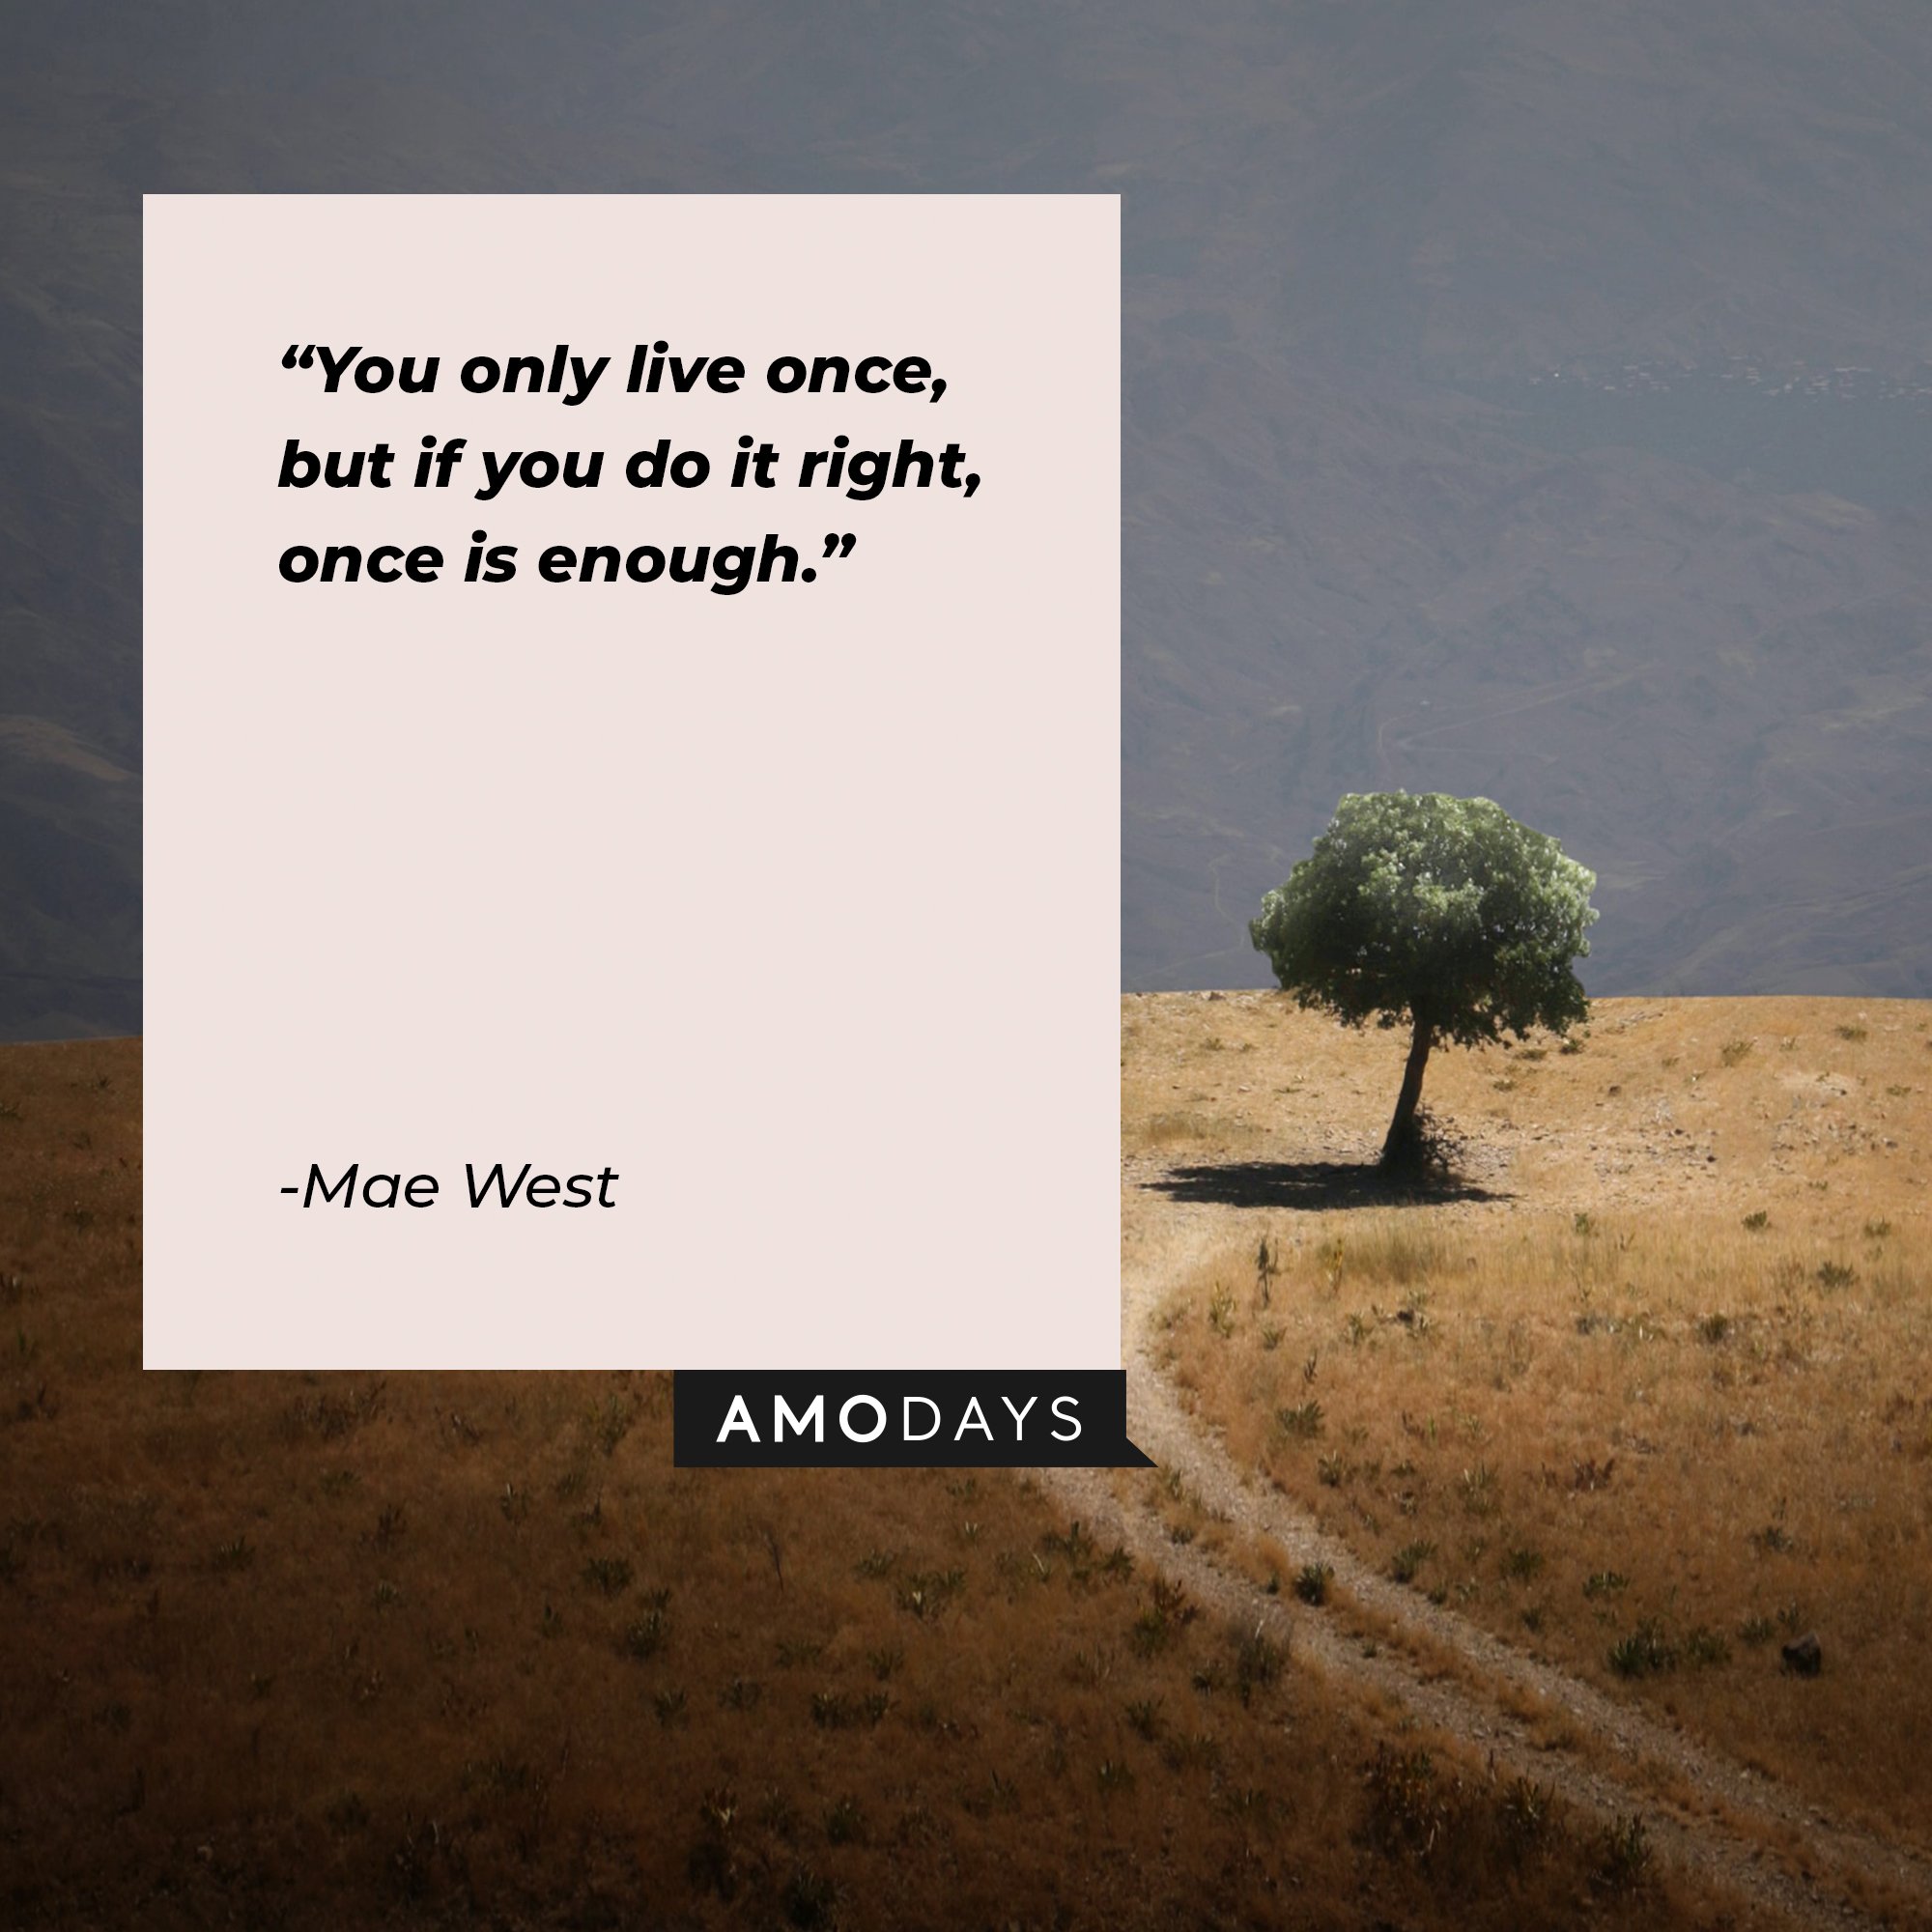  Mae West’s quote: “You only live once, but if you do it right, once is enough.” | Image: AmoDays 